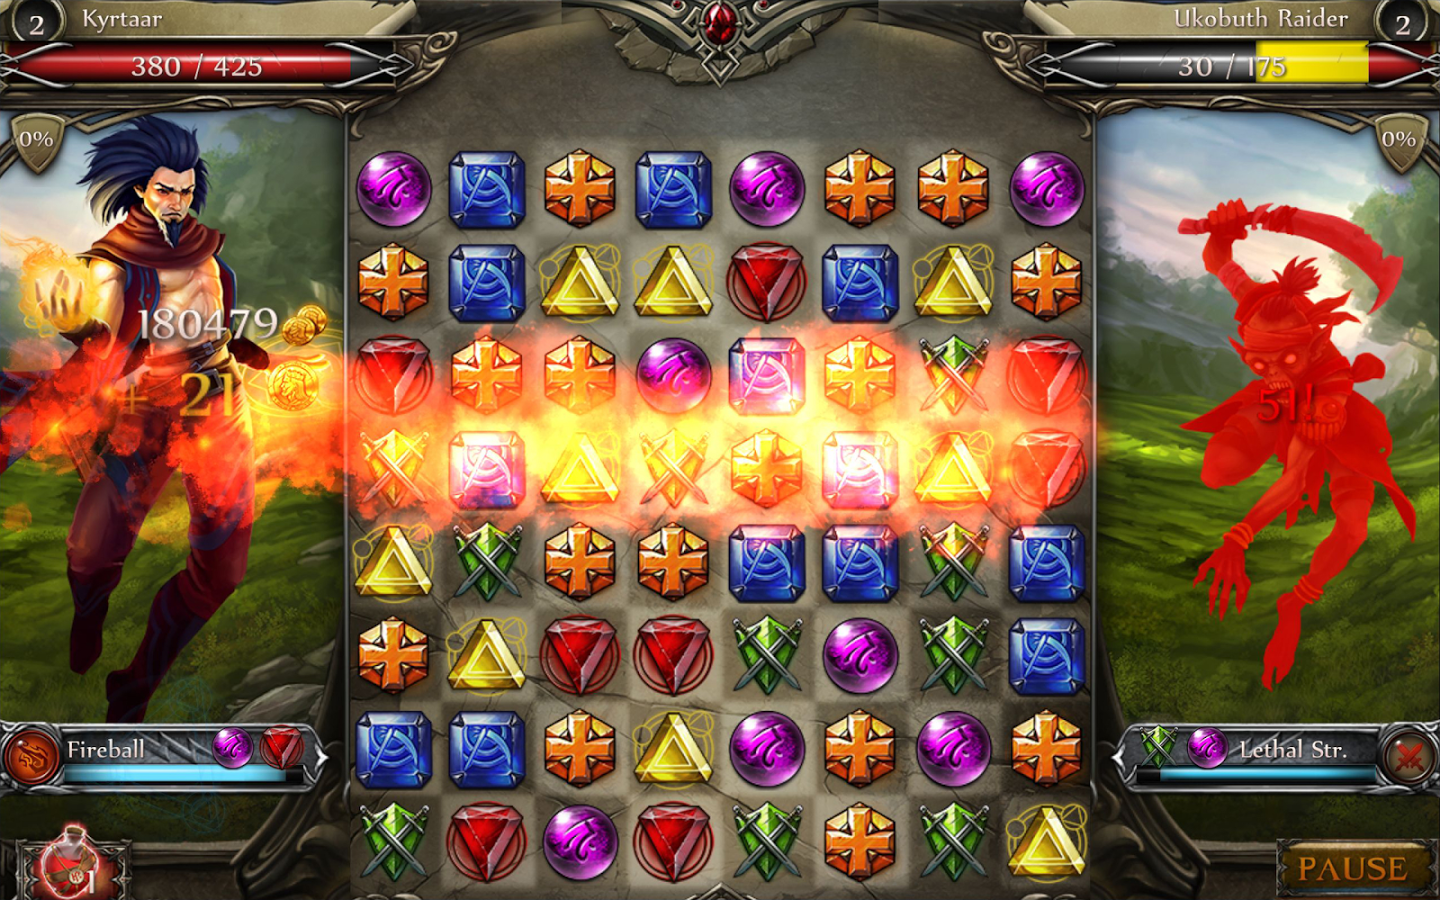 Jewel Fight Heroes of Legend MOD APK+DATA (Unlimited Gems/Coins)